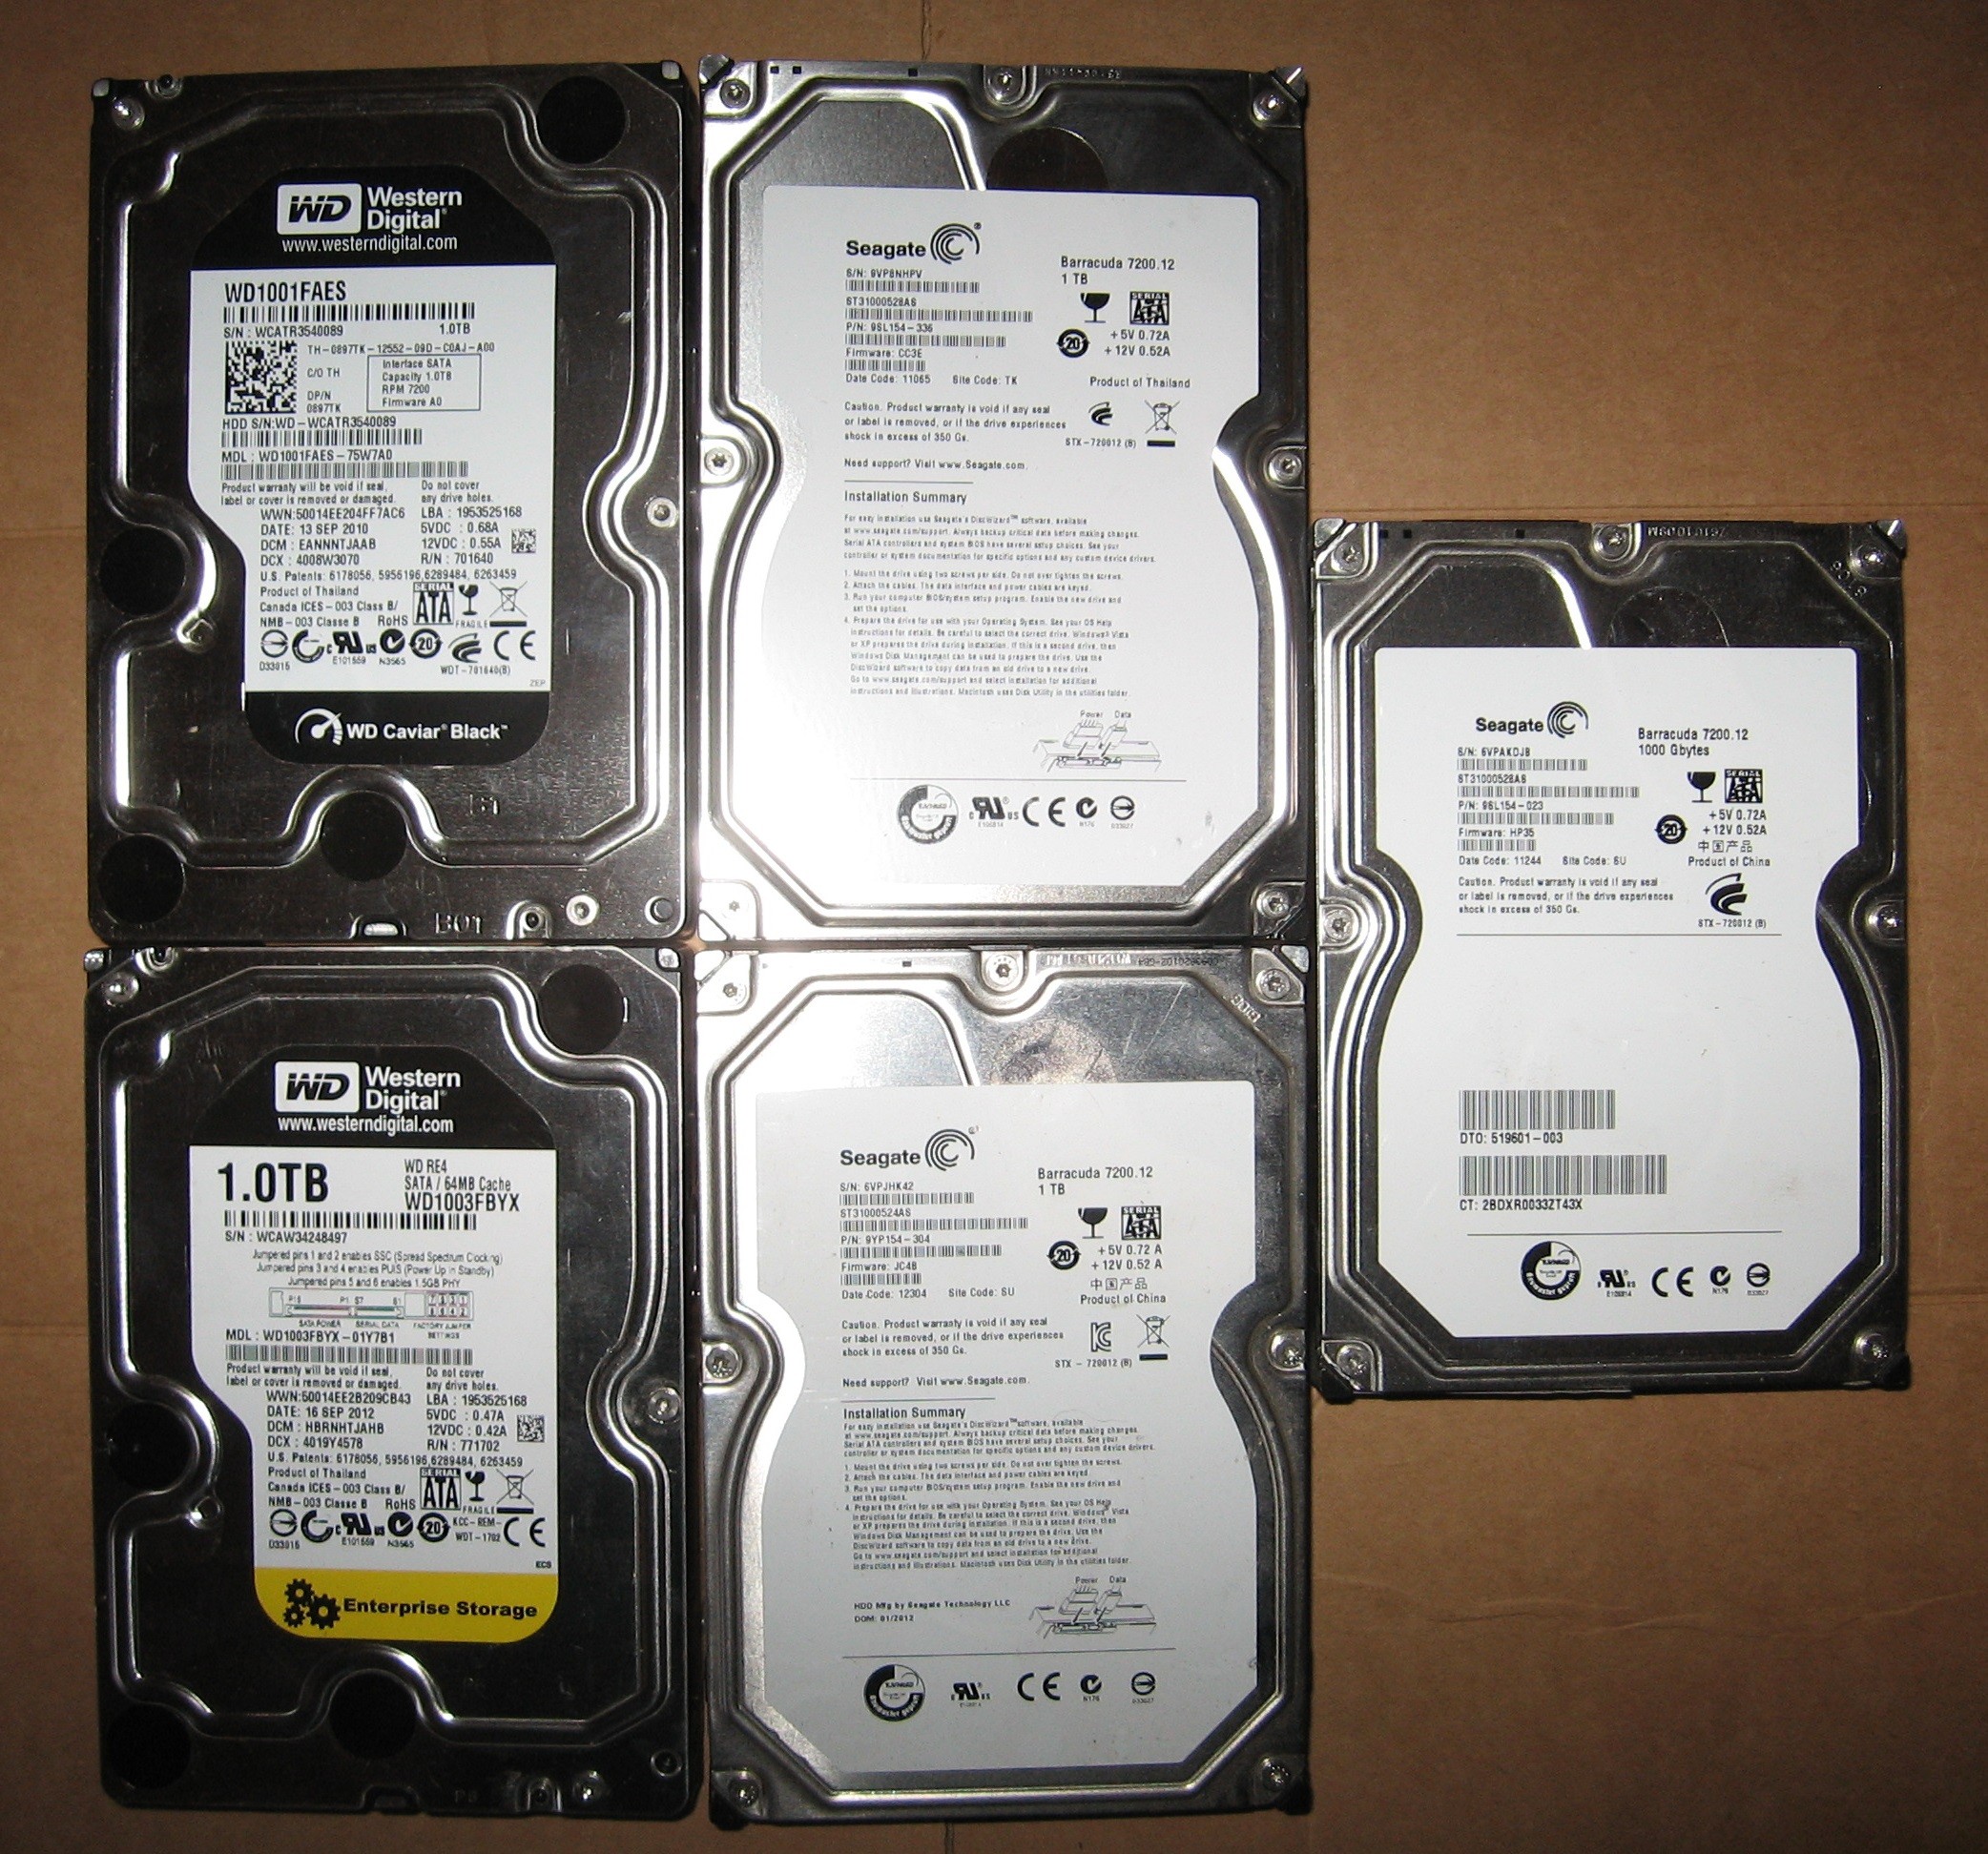 1TB Lot of 5 Seagate and WD